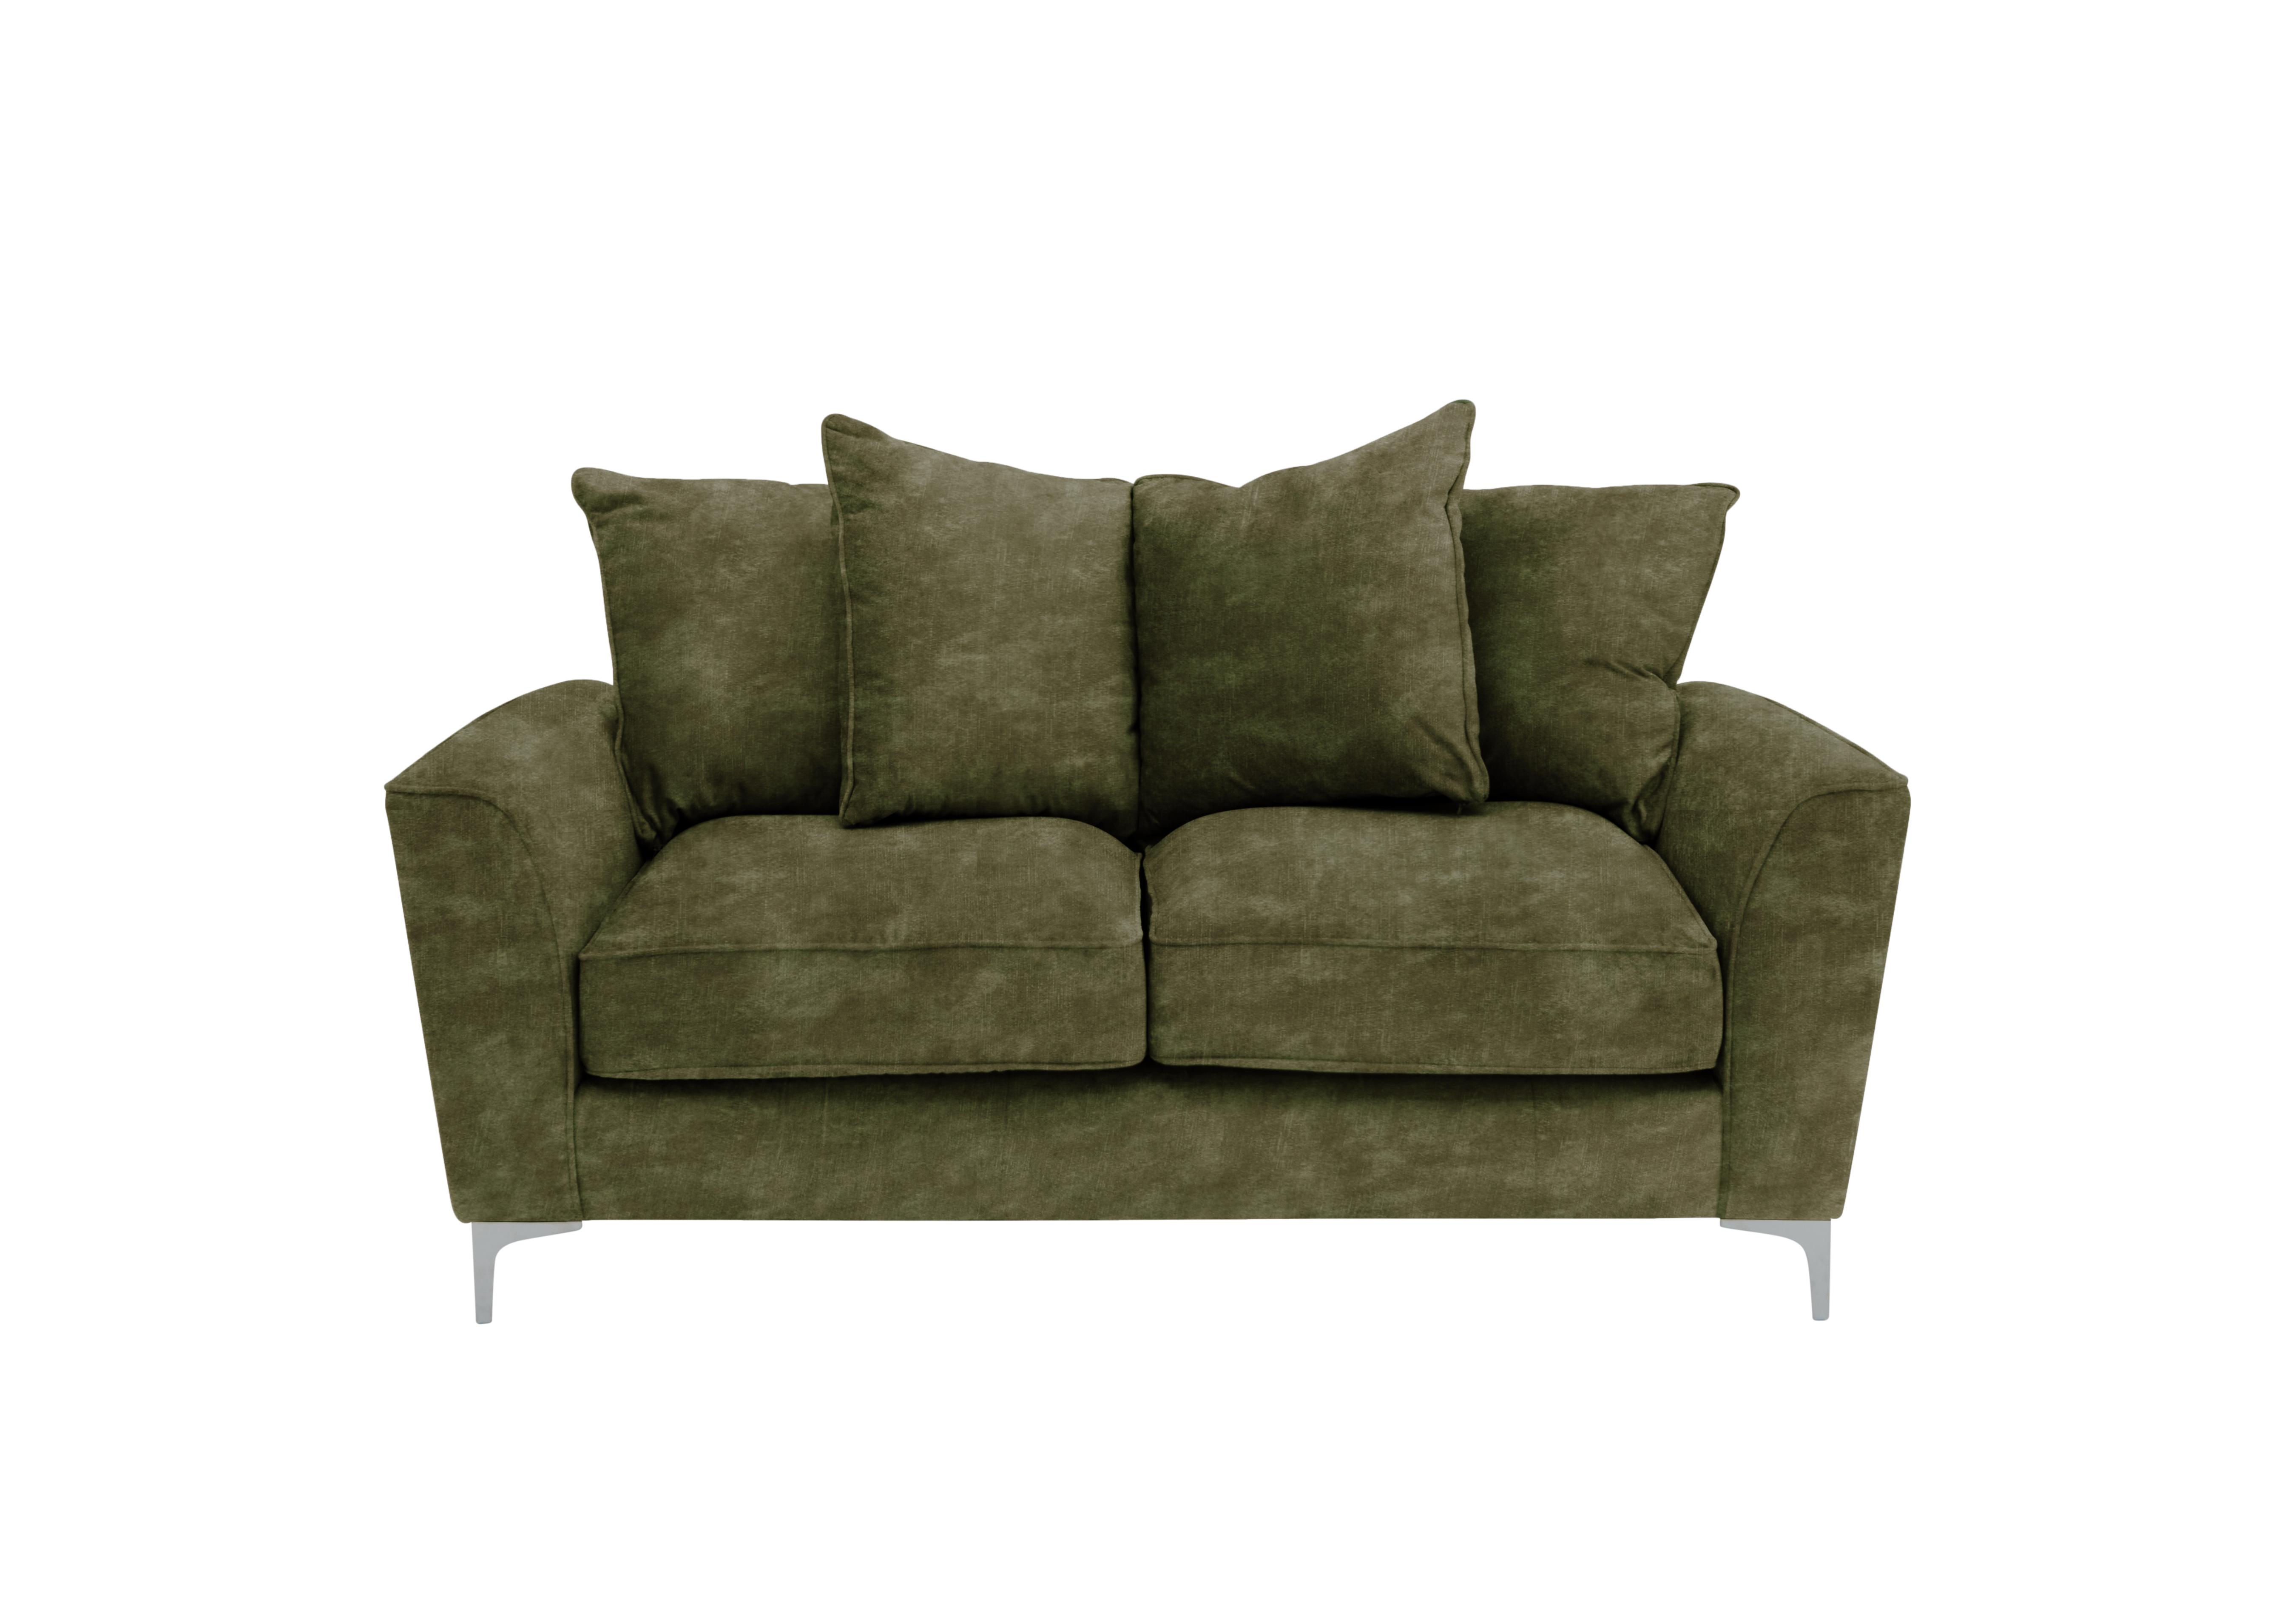 Legend 2 Seater Pillow Back Fabric Sofa in Sublime Olive on Furniture Village